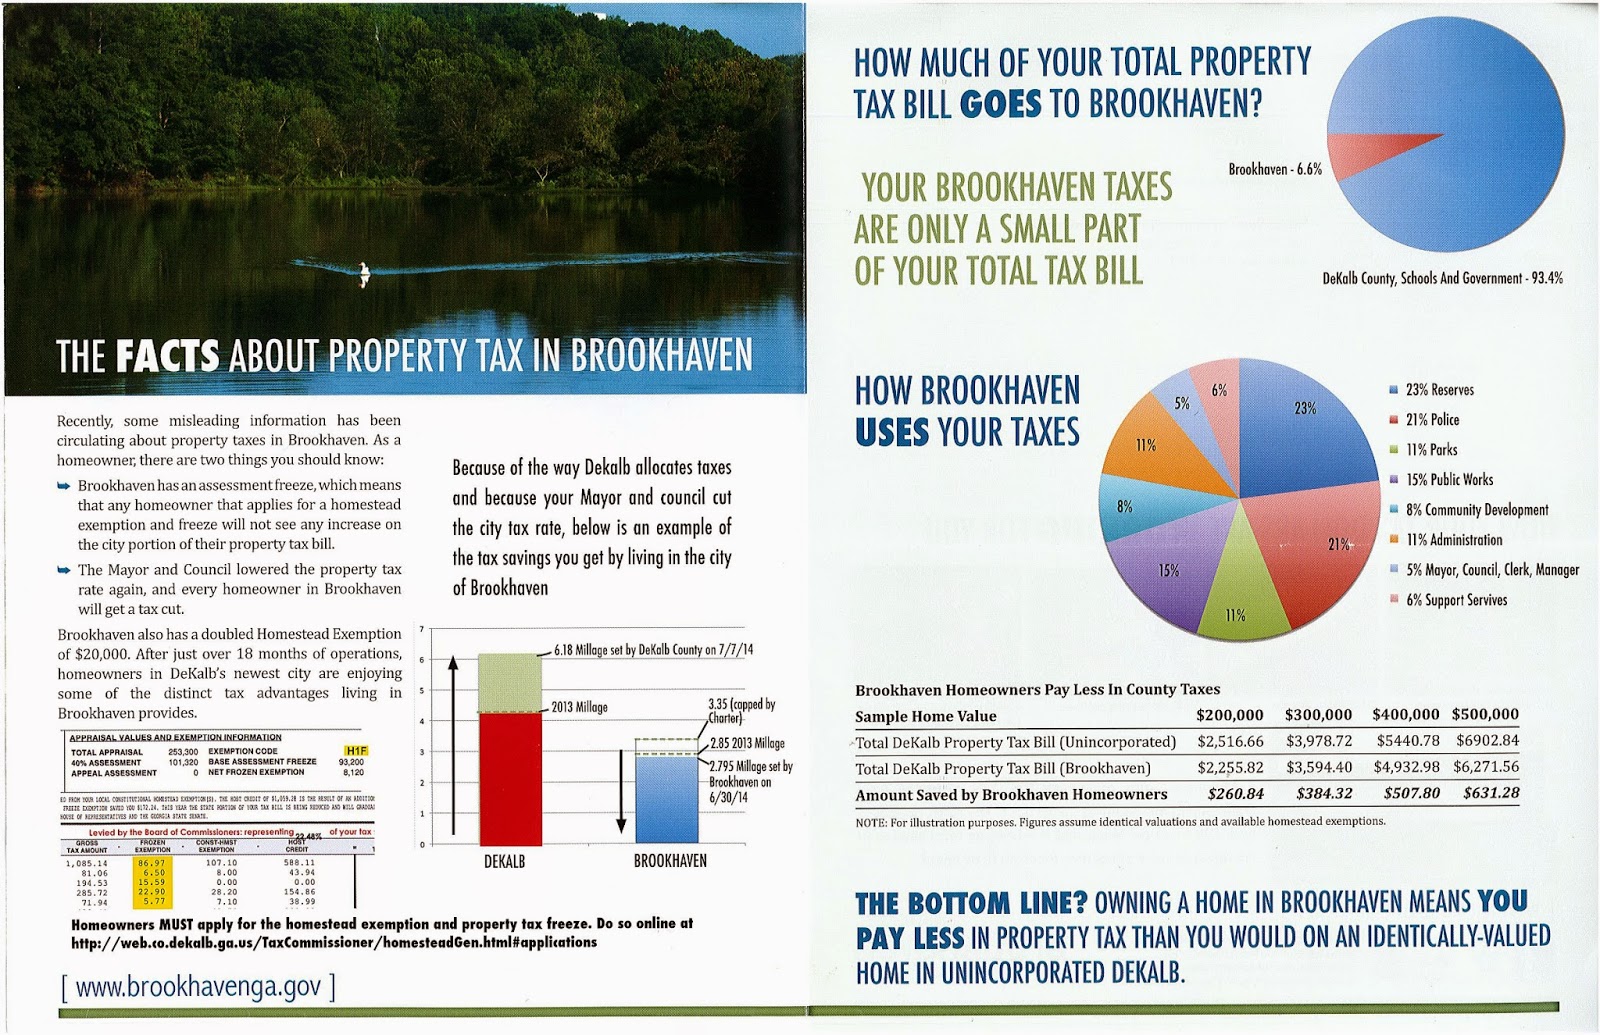 decatur-tax-blog-brookhaven-s-tax-savings-fact-checked